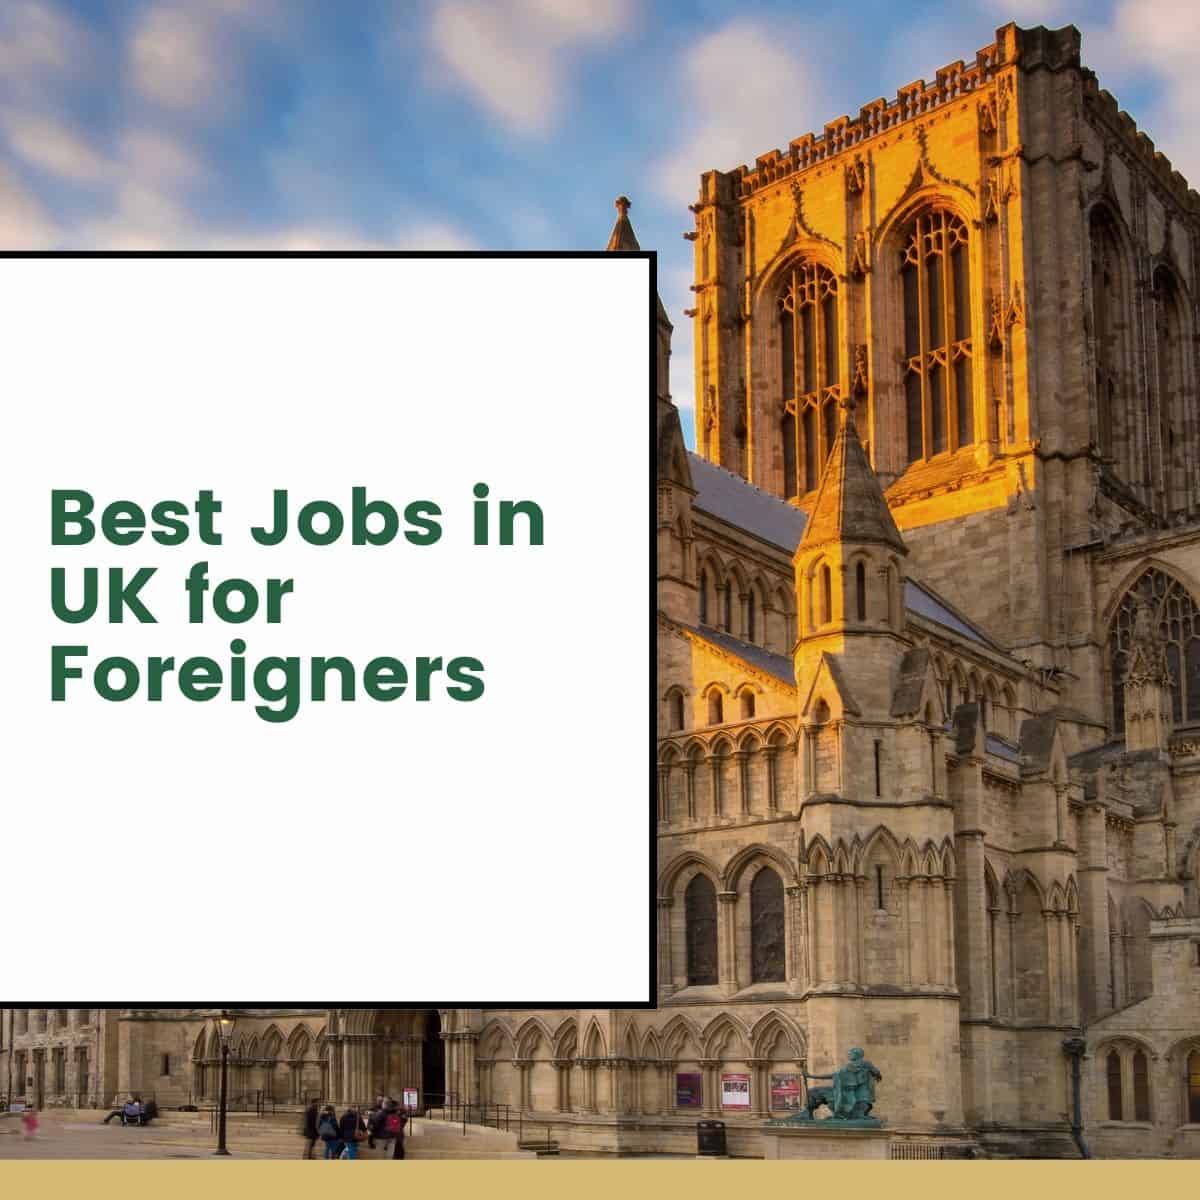 Best Jobs in UK for Foreigners